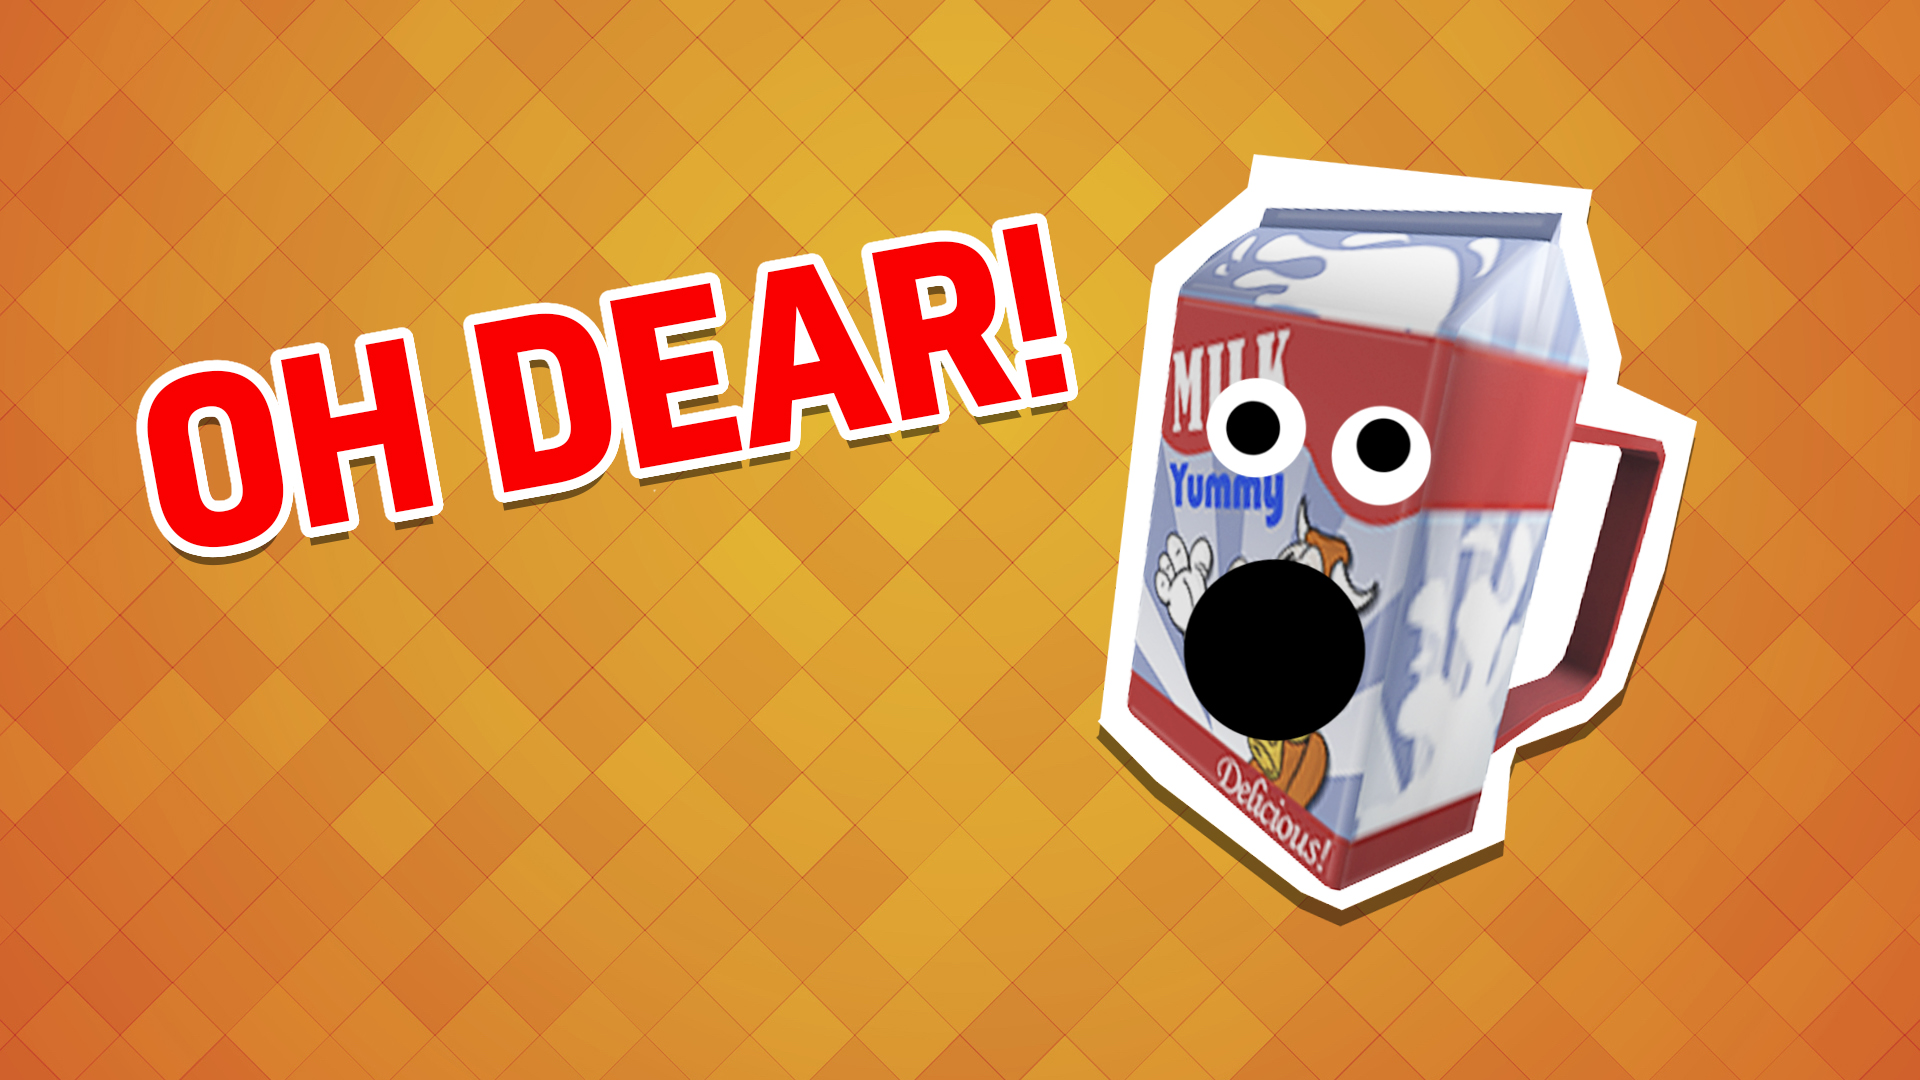 Oh dear. This milk carton can't believe your score!